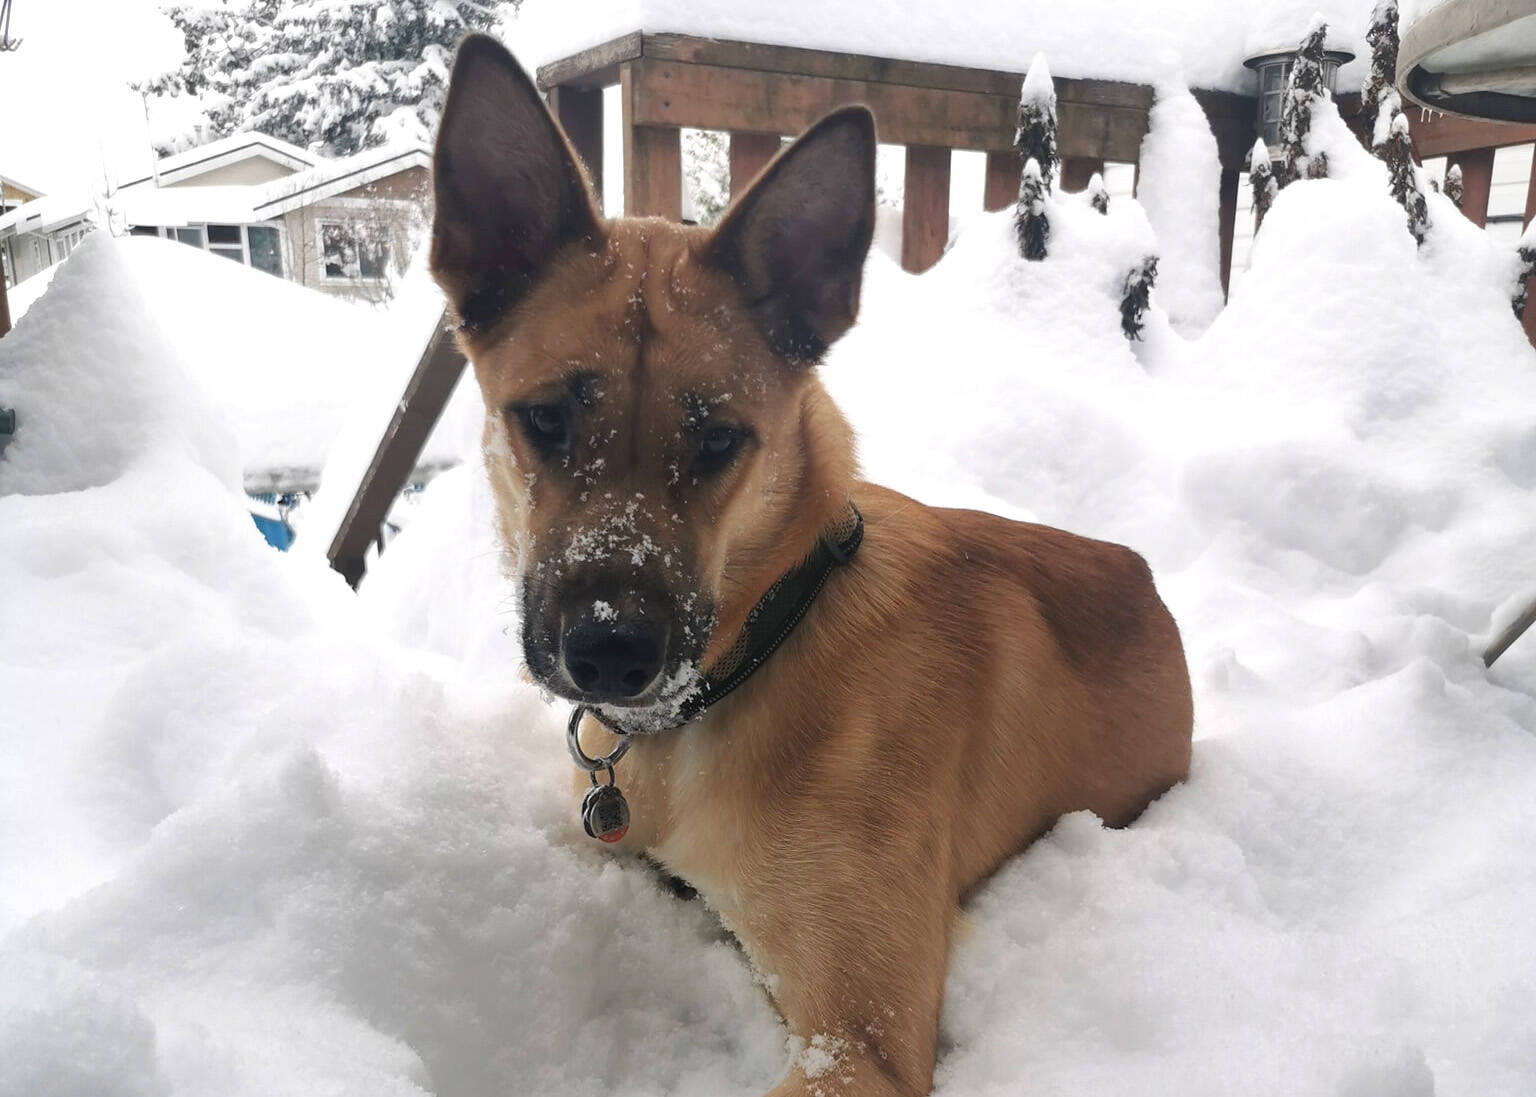 Natasha Hill snapped this picture of her pup enjoying some very deep snow in their Abbotsford yard on Dec. 20. (Submitted/Natasha Hill)